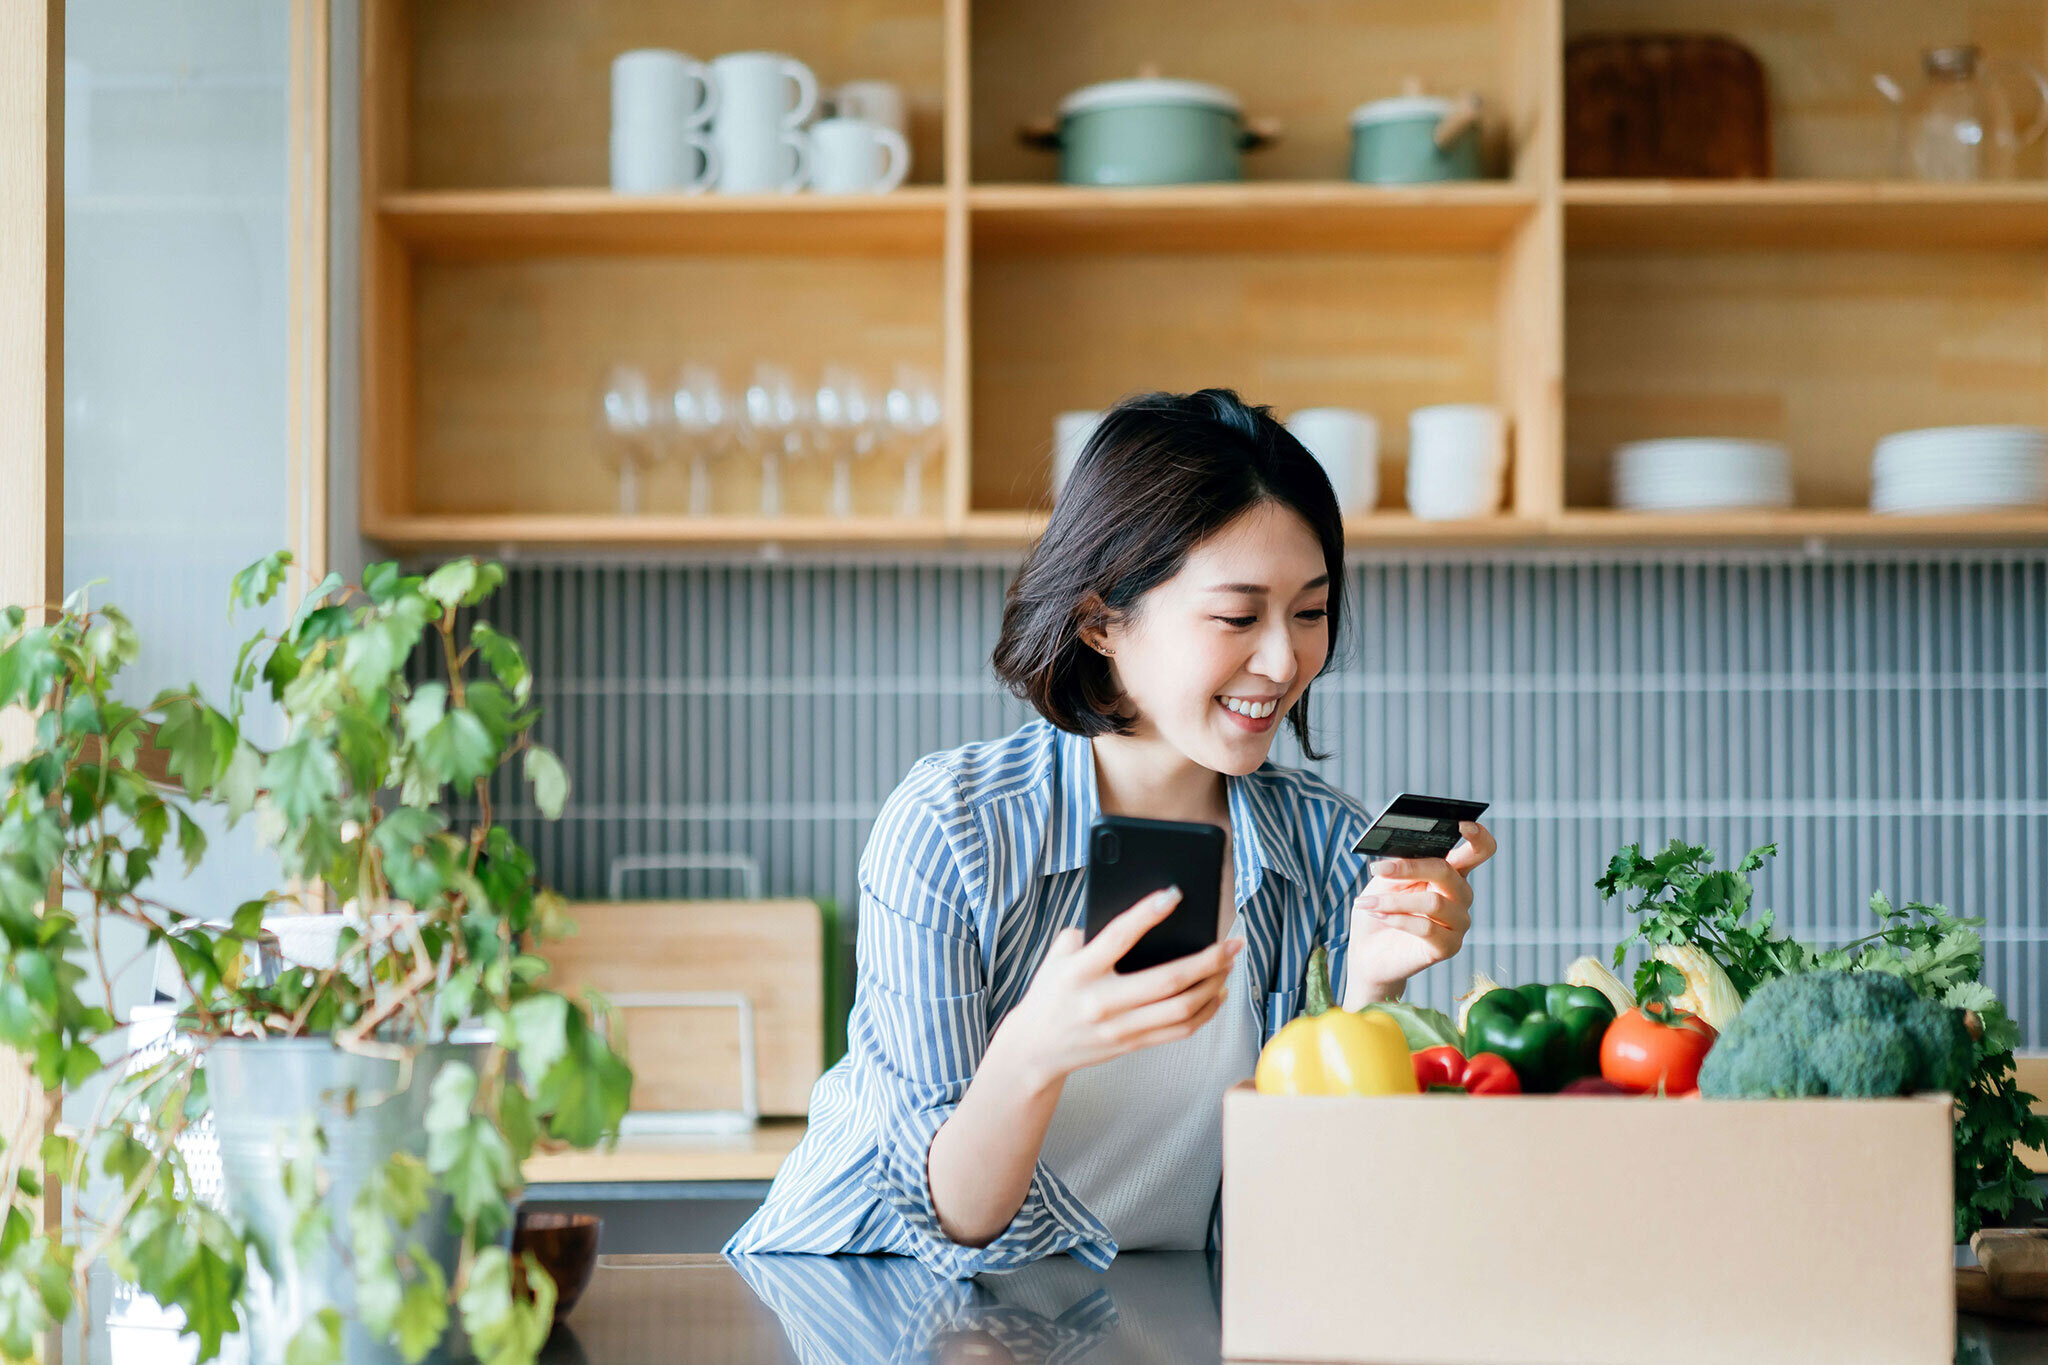 Woman smiling in kitchen with credit card and phone